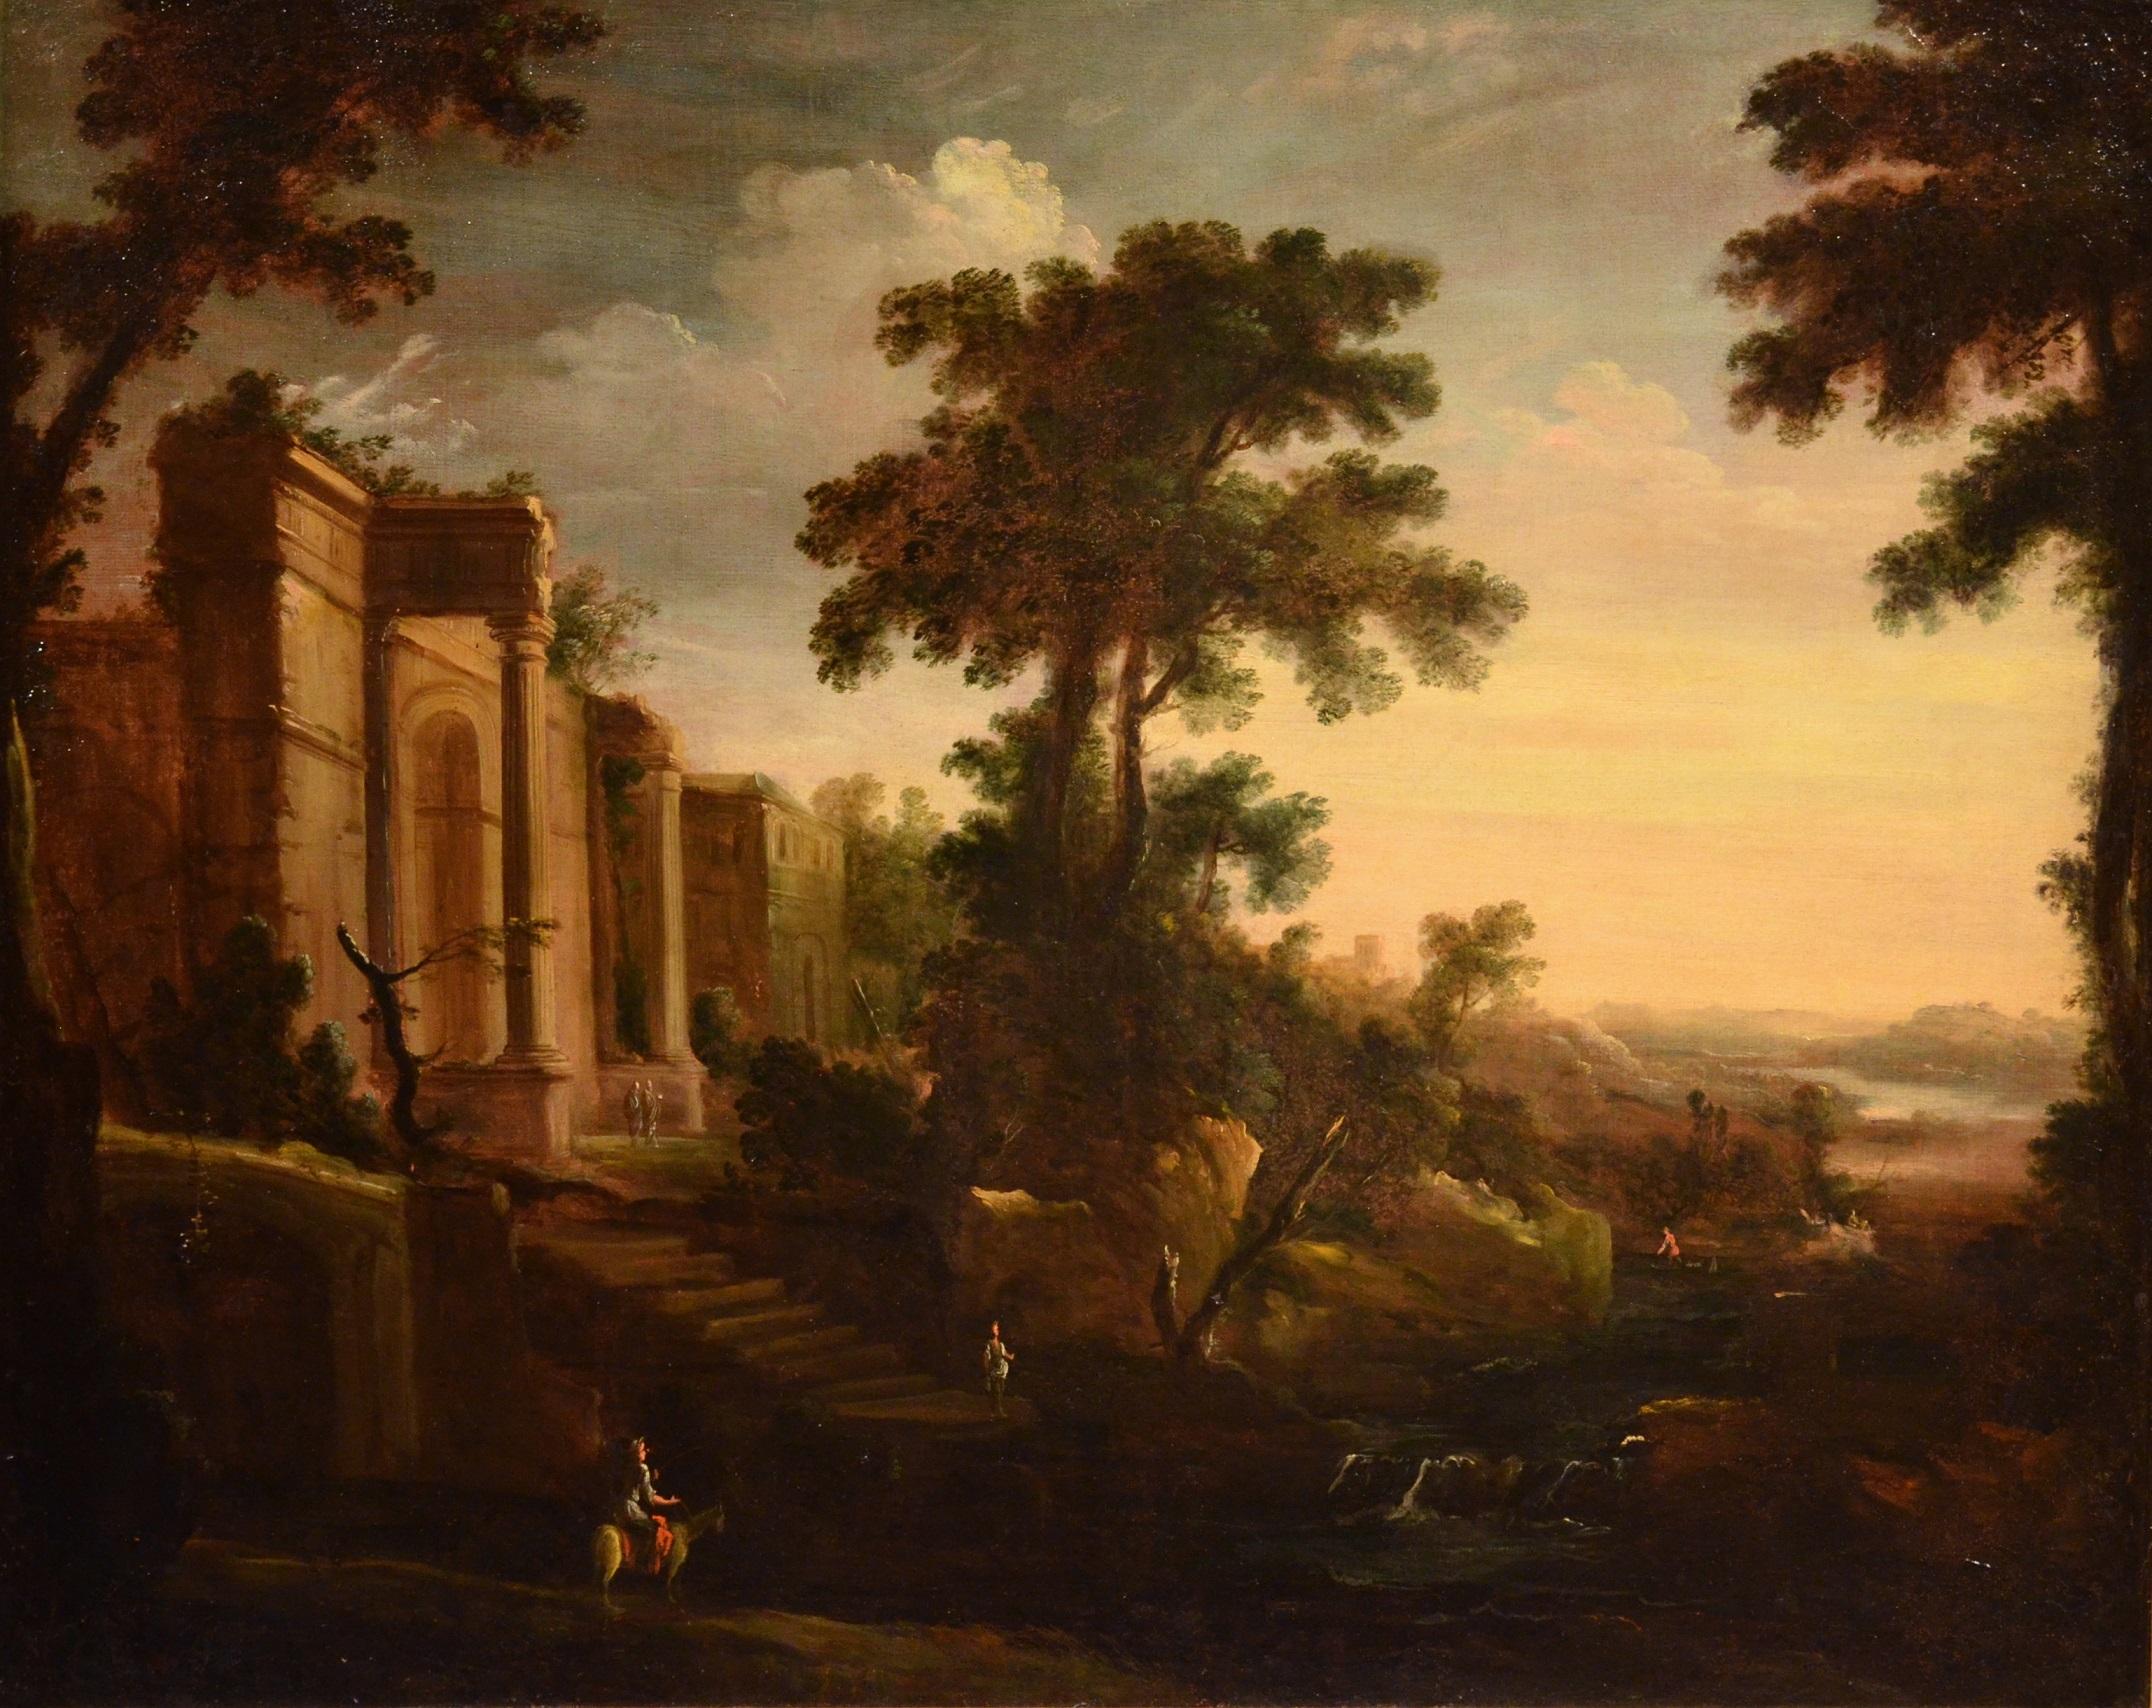 Paint Oil on canvas 17th Century Wood Landscape Temple Italy Old master Roma Art - Painting by Pierre-Antoine Patel (Paris 1648 - 1707), attributable to